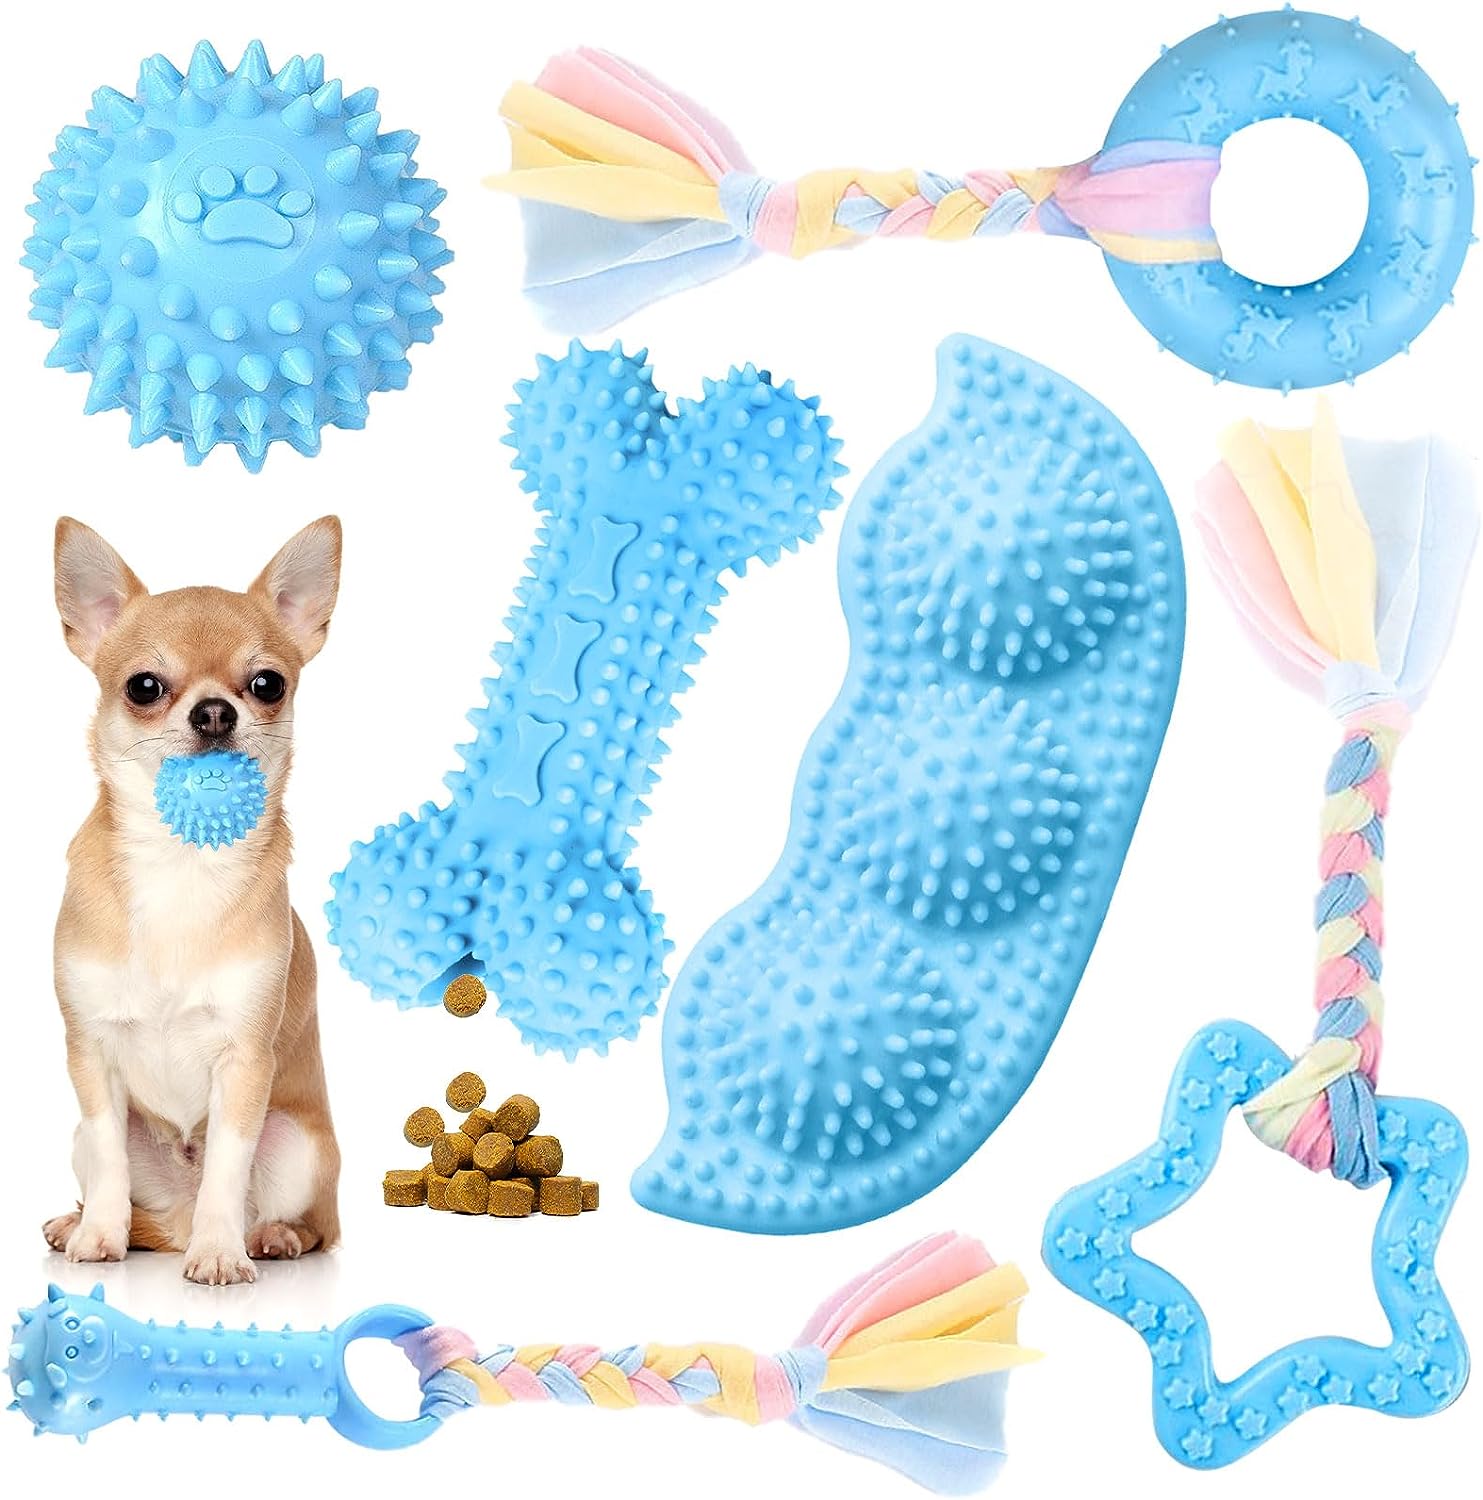 https://suburban-k9.com/wp-content/uploads/2023/09/Best-Chew-Toys-For-Puppies-Petcare-6-Pack-Puppy-Chew-Toys-For-Teething.jpg